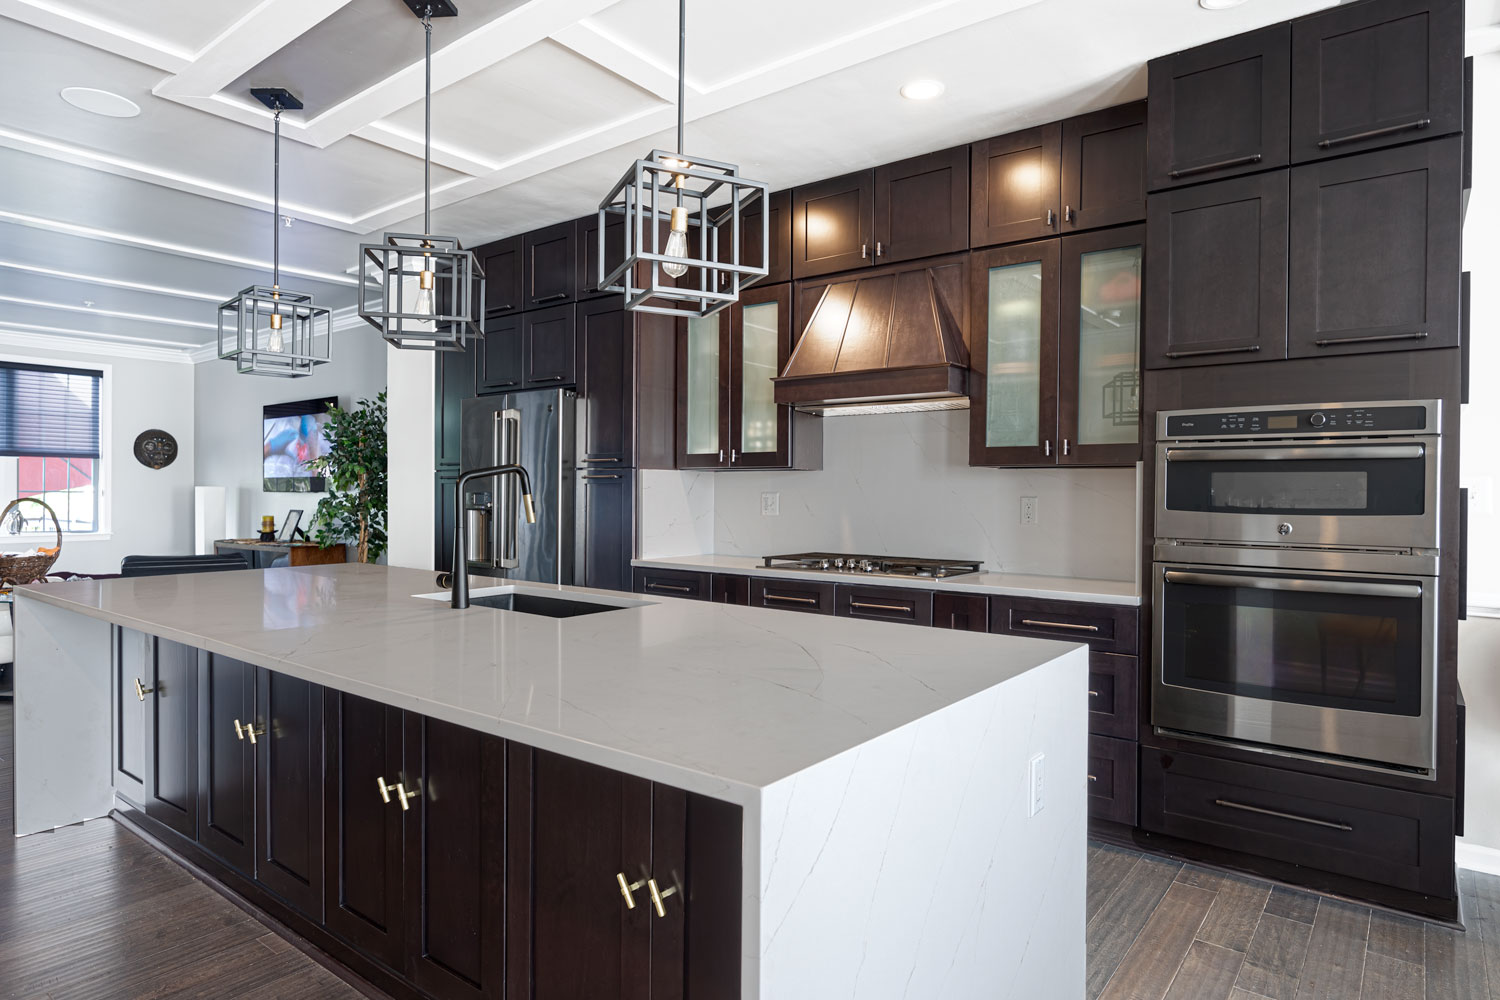 Interior Renovations in Maryland - Kitchen Remodeling